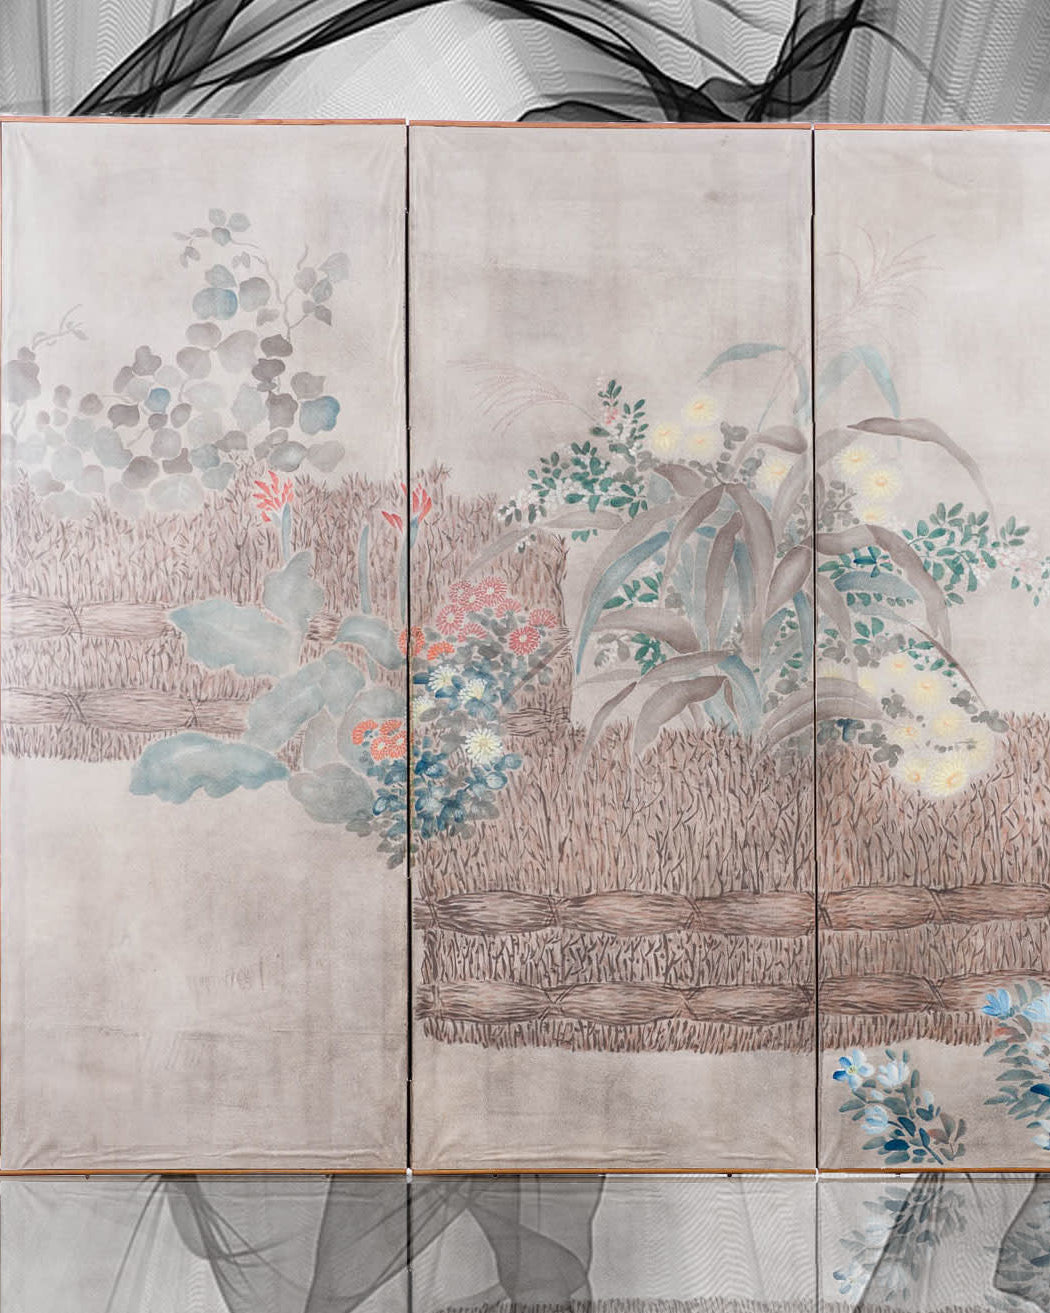 Lawrence & Scott Sung Tze-Chin Large Chinoiserie Hanging Screen Ink on Paper "Brushed Wood Fence With Chrysanthemum" 11 Feet Wide by 6 Feet Height